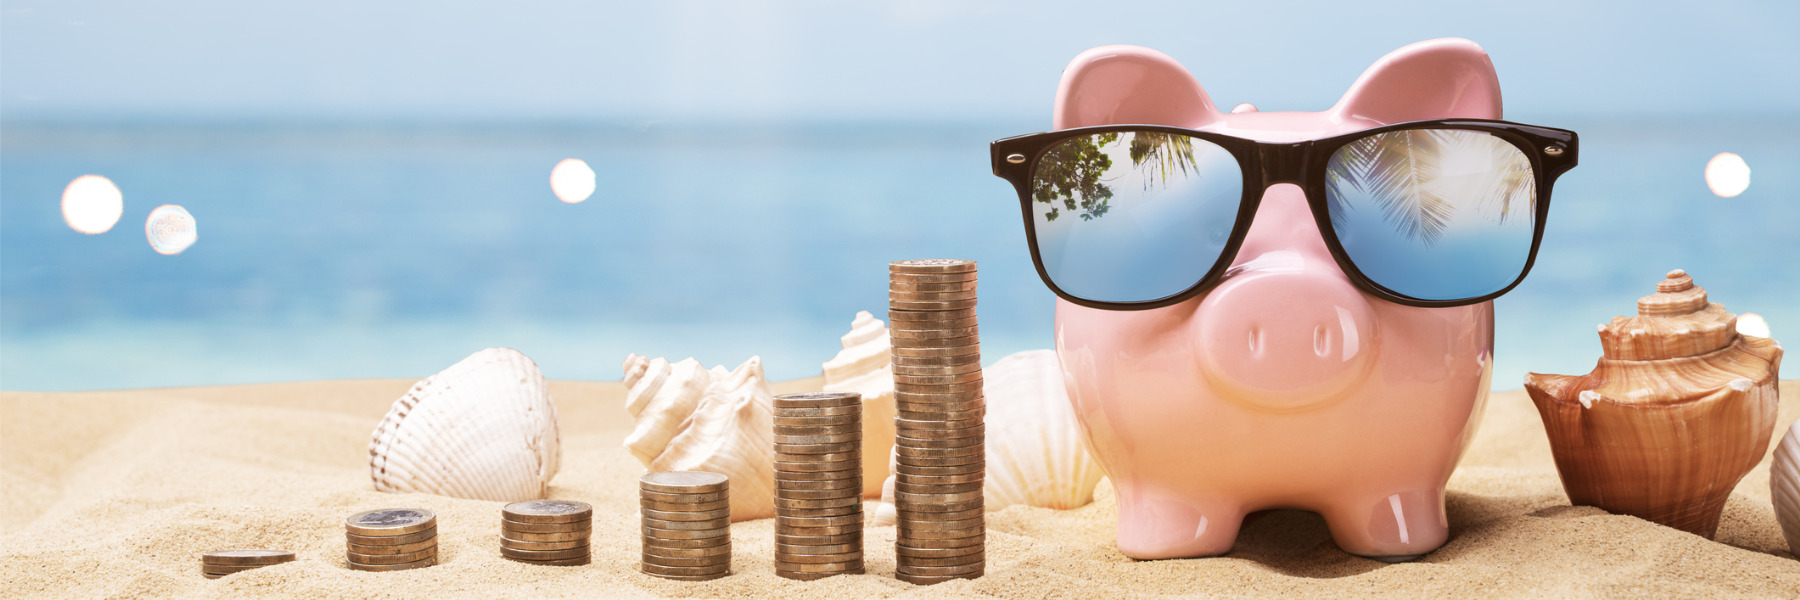 picture of piggy bank on beach with coins